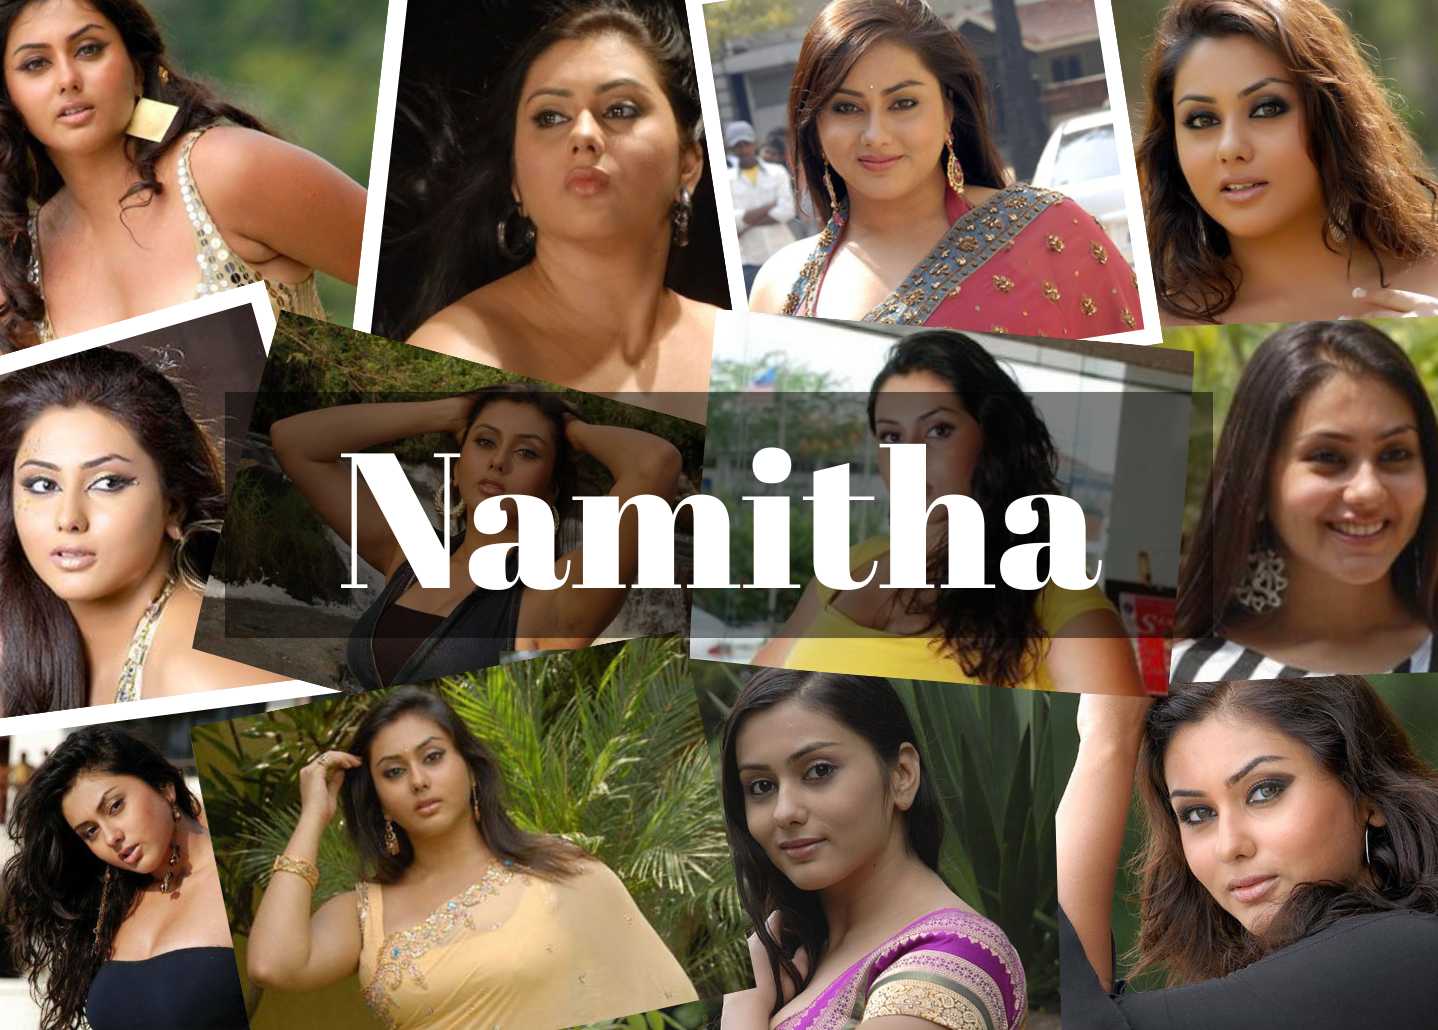 Sania Bf Video Bf Video Bf - Namitha Biography Net Worth Facts Controversy